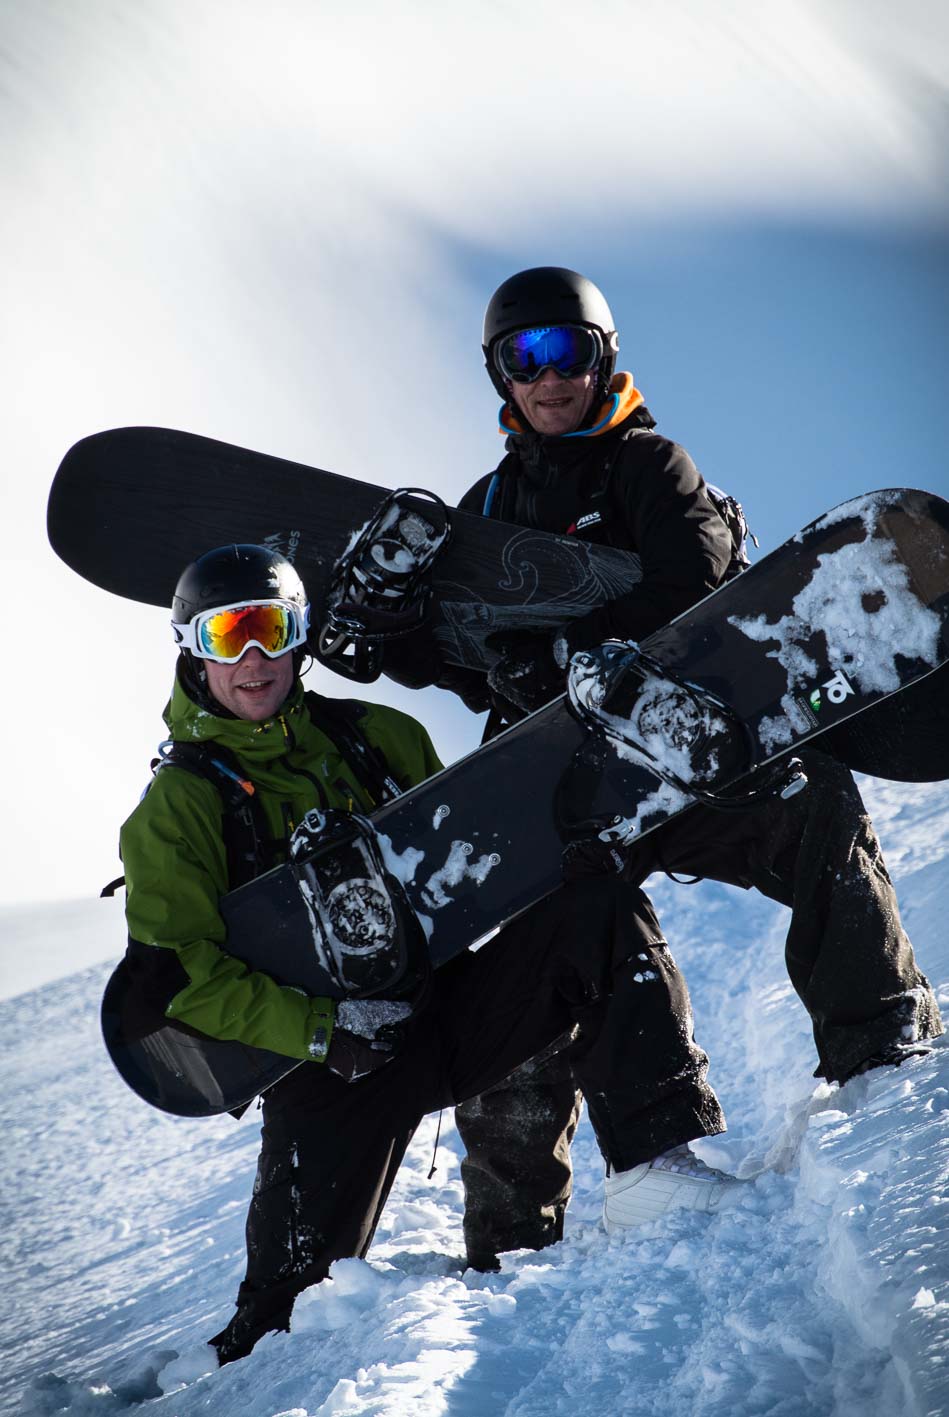 learn to ride snowboard